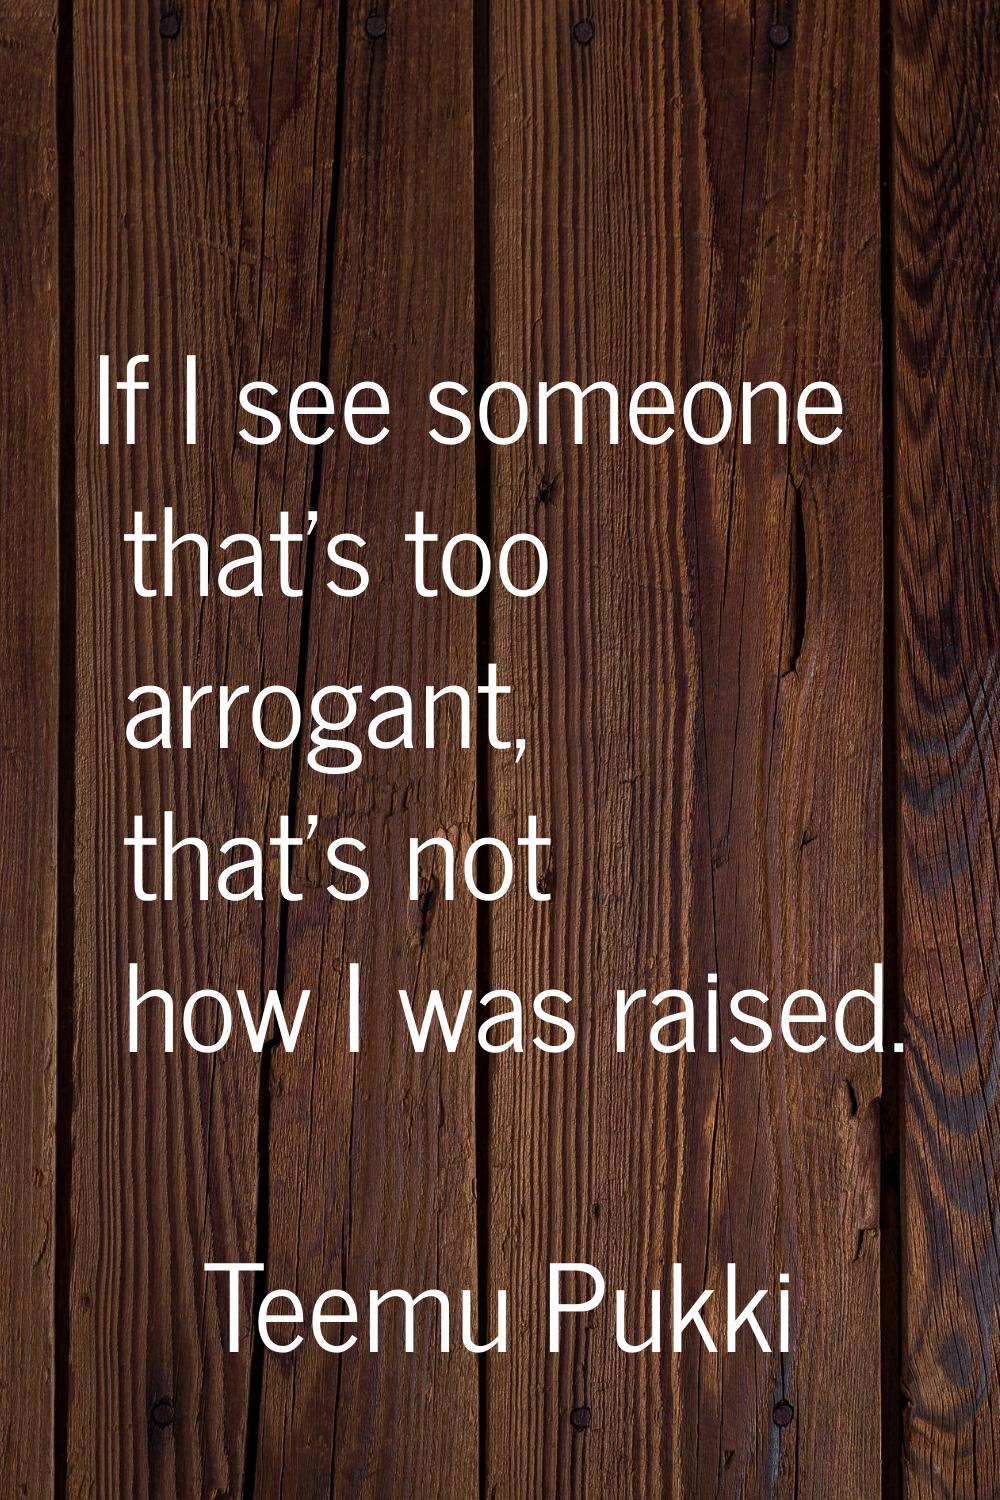 If I see someone that's too arrogant, that's not how I was raised.